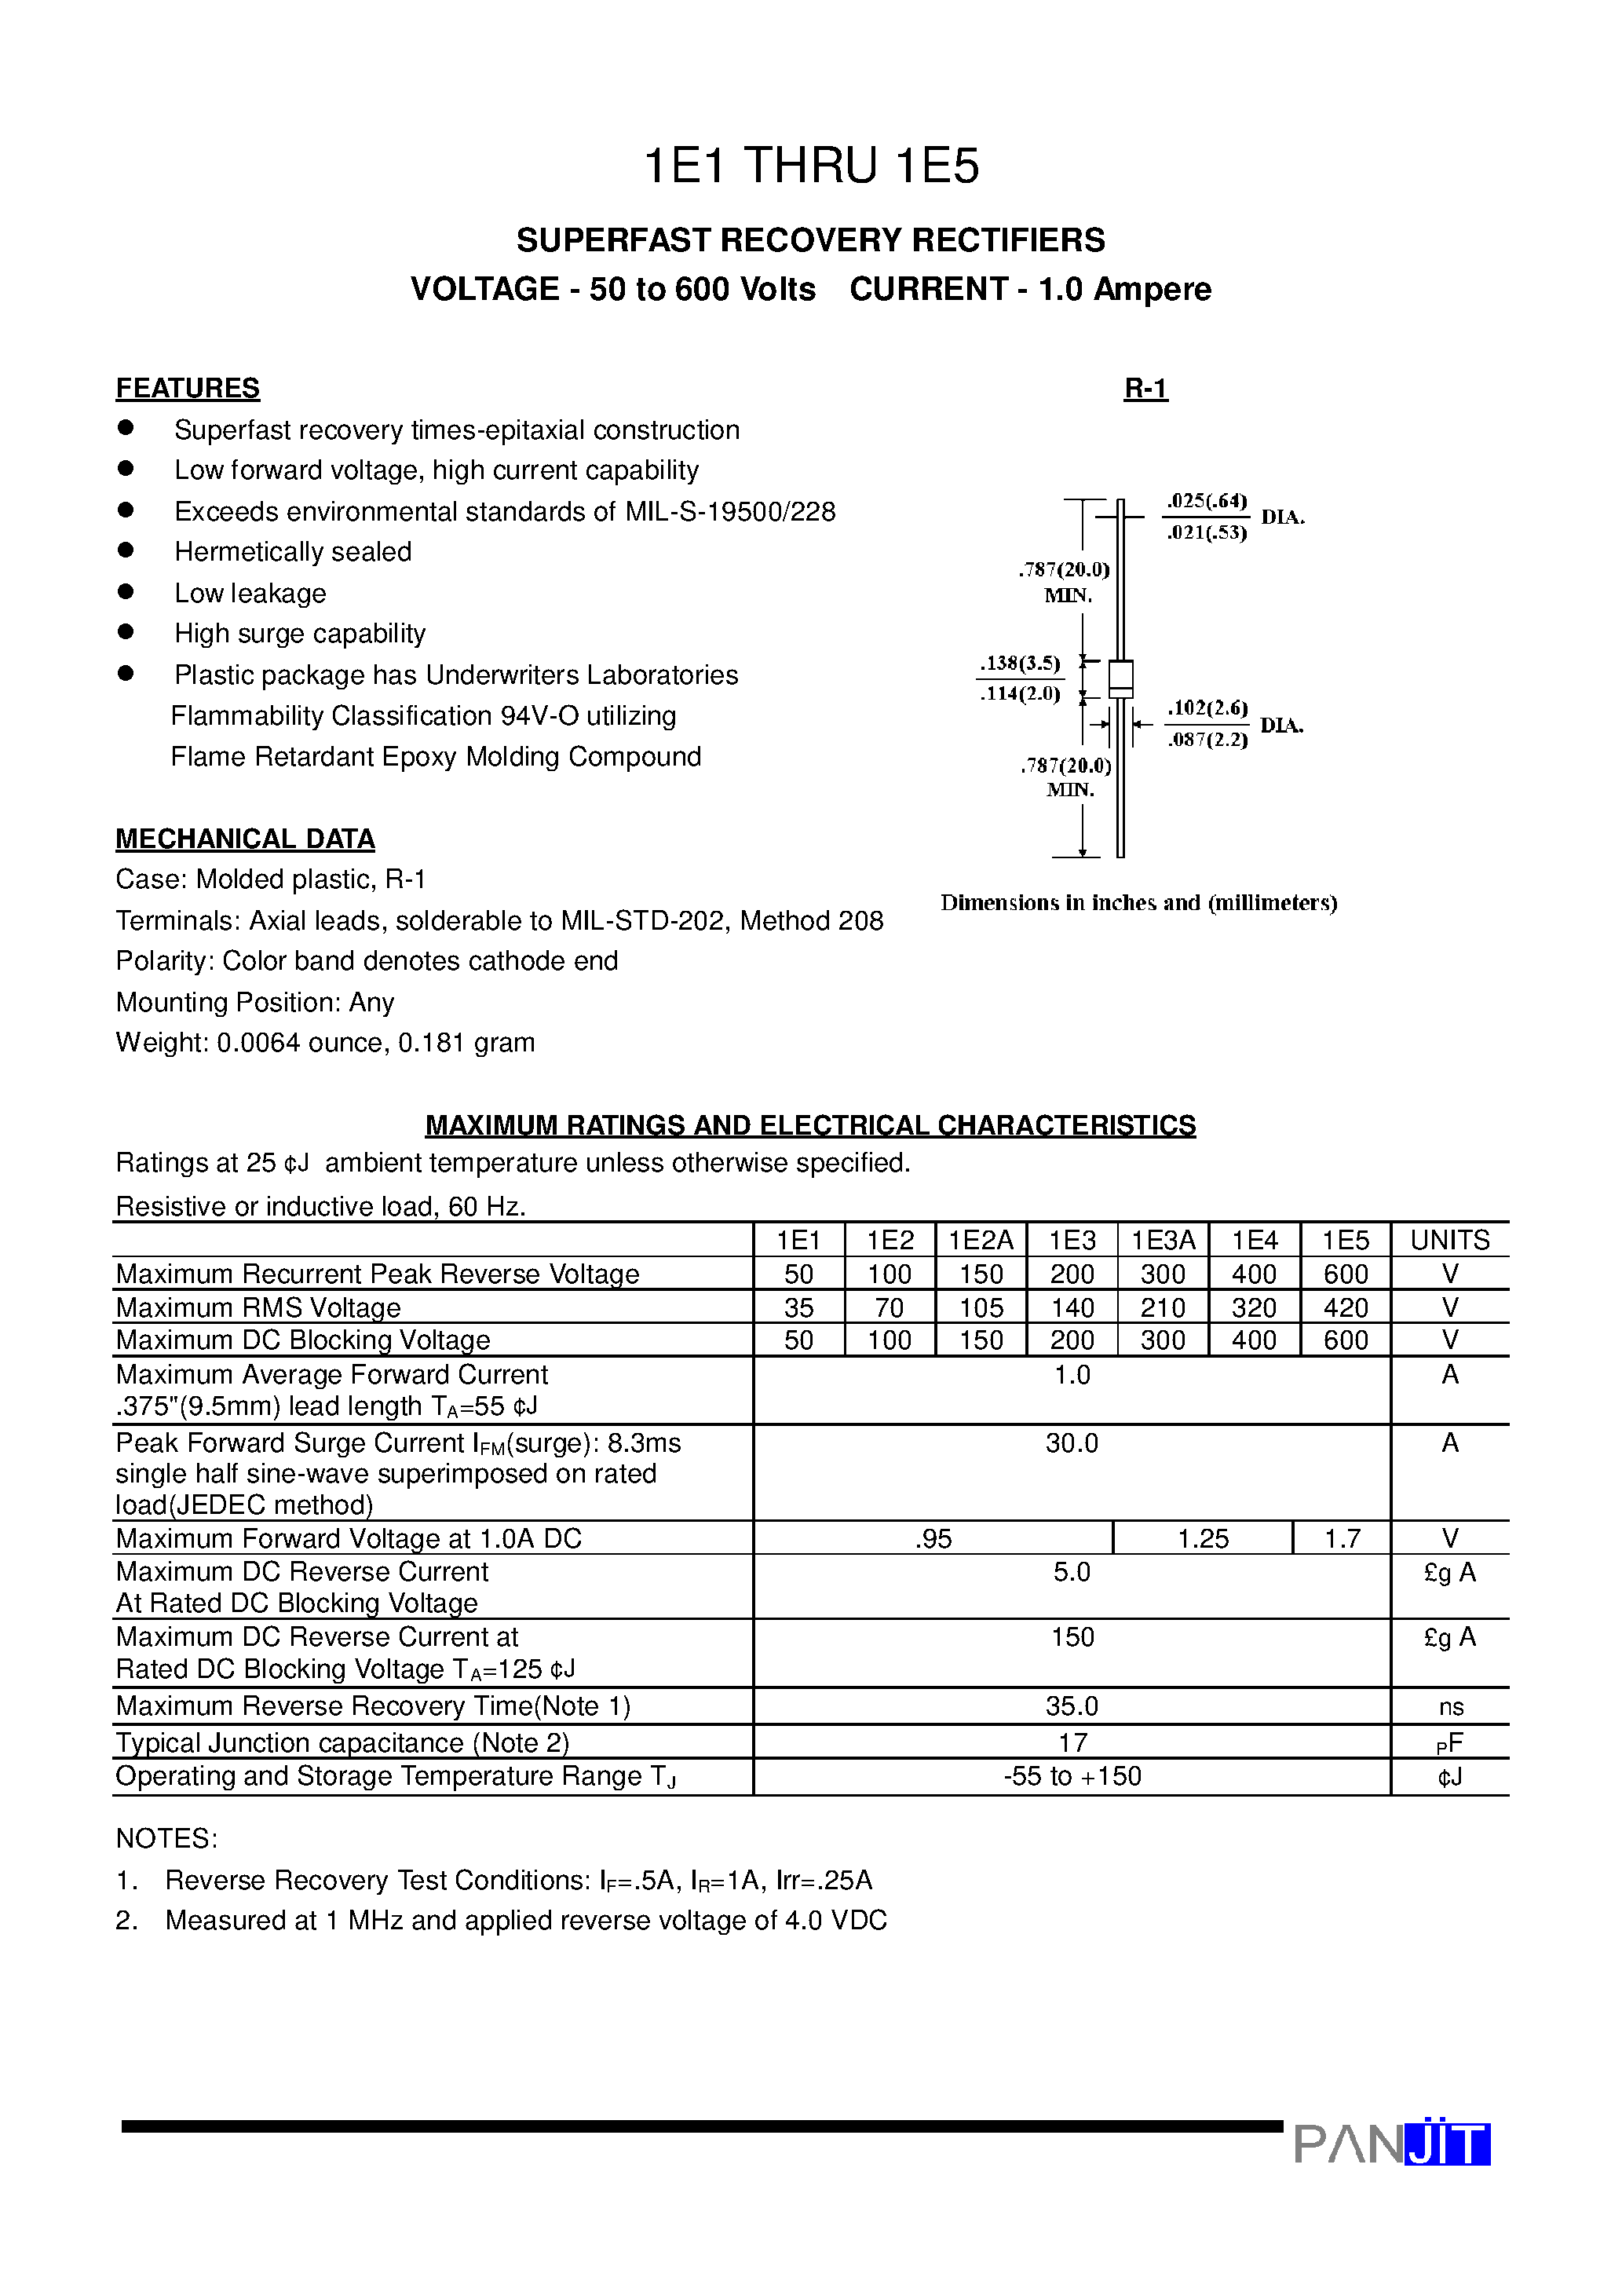 Datasheet 1.00E+03 - SUPERFAST RECOVERY RECTIFIERS(VOLTAGE - 50 to 600 Volts CURRENT - 1.0 Ampere) page 1